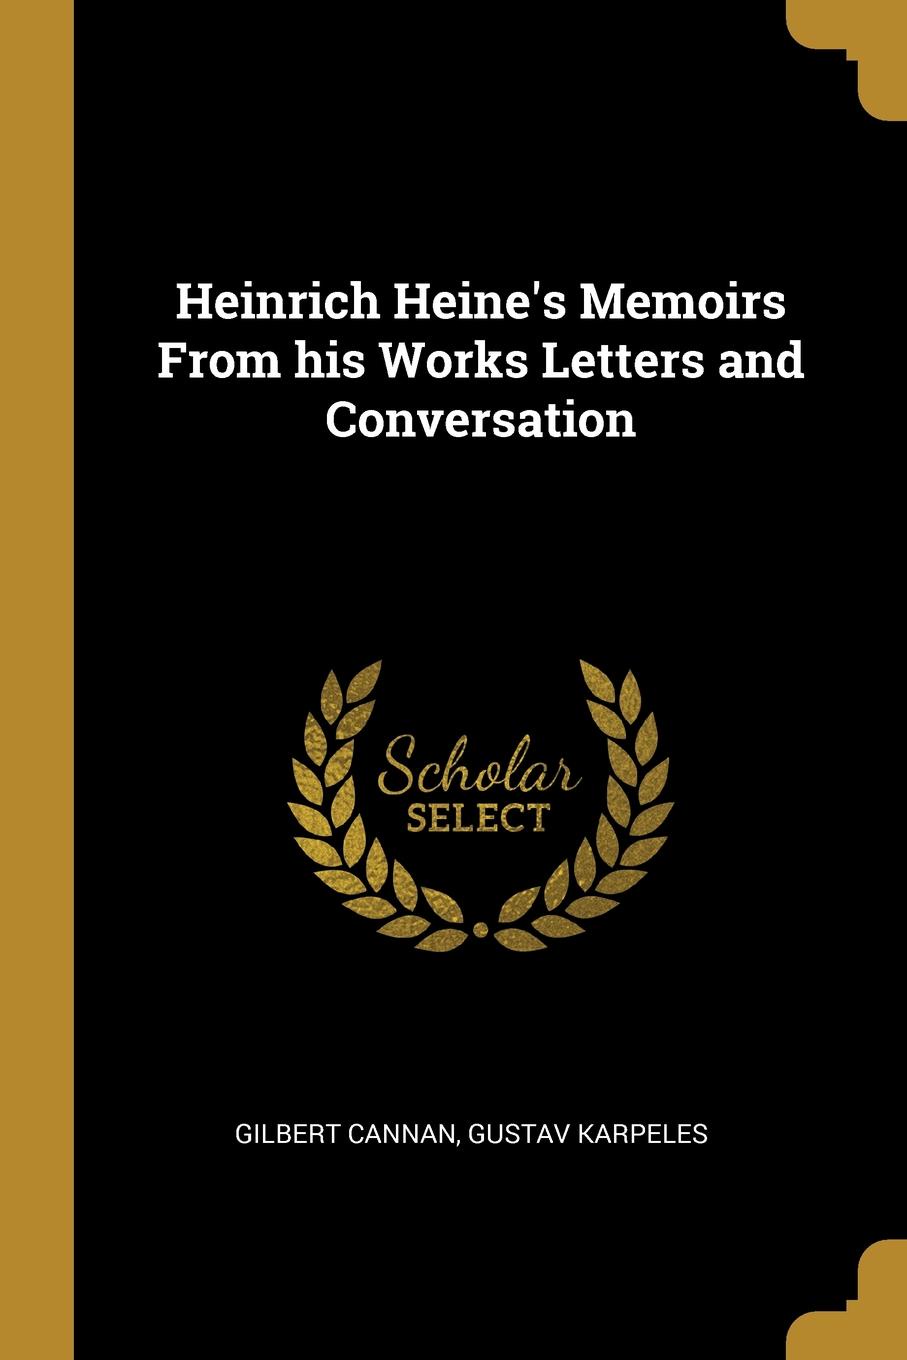 Heinrich Heine.s Memoirs From his Works Letters and Conversation